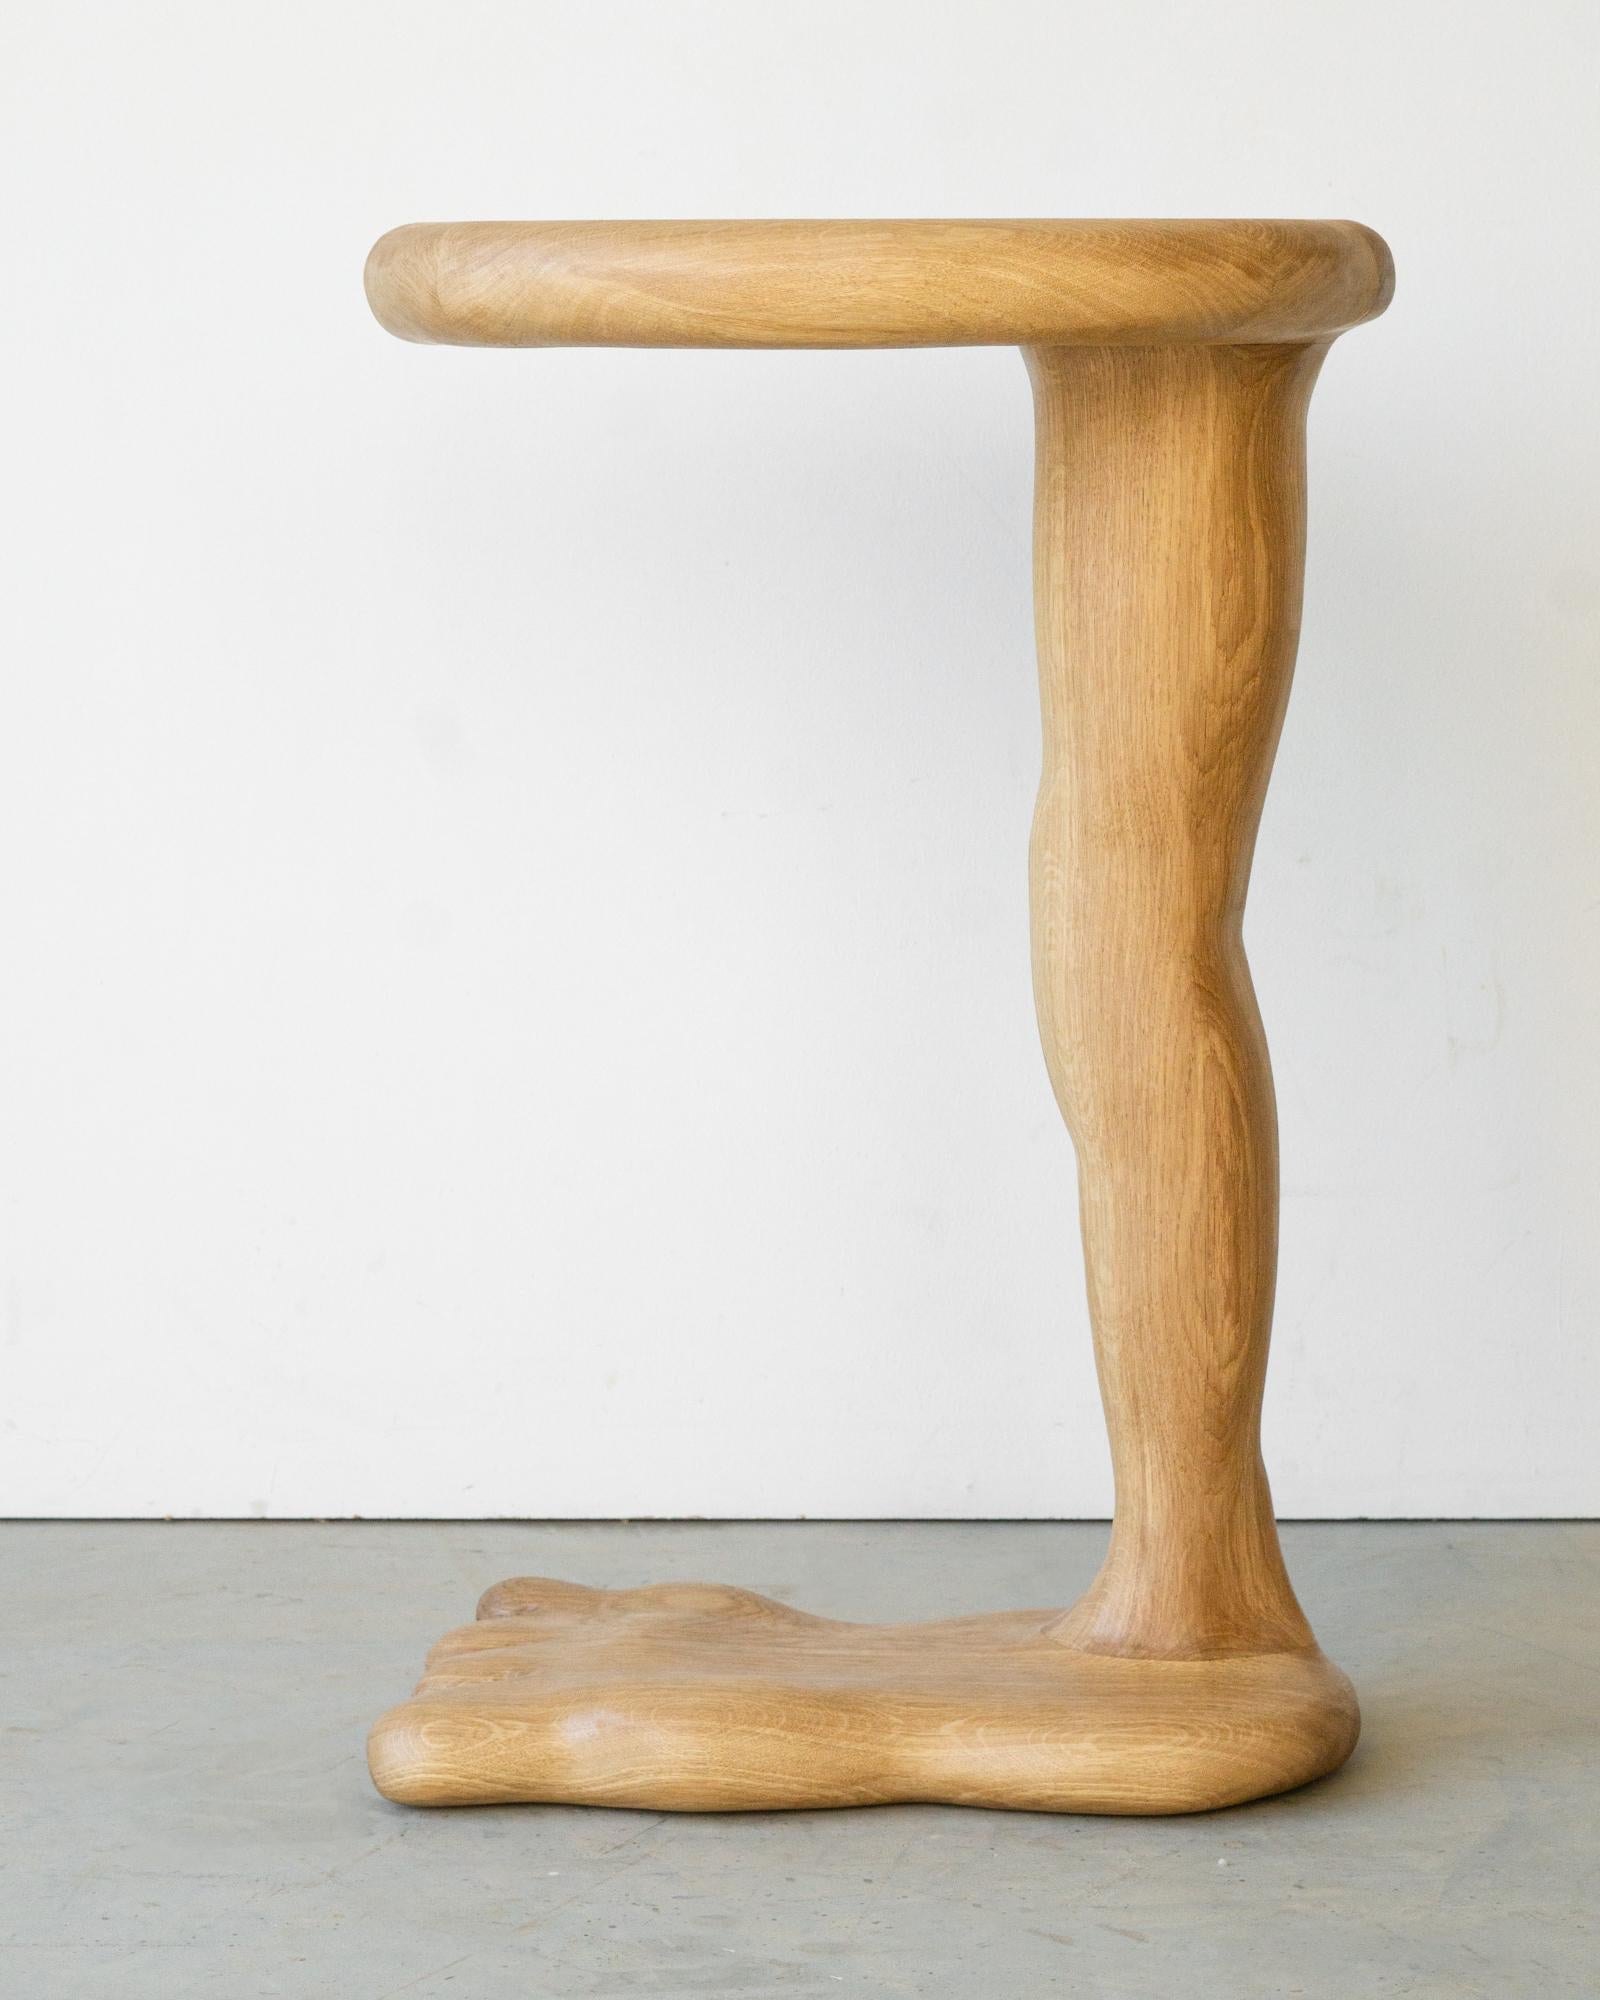 The Leg Side Table is sculpted using various hand tools, making each piece unique with its own distinctive wood grain. 

It is made from high-quality oak wood and finished with a natural hardwax oil, providing protection to the wood in daily use